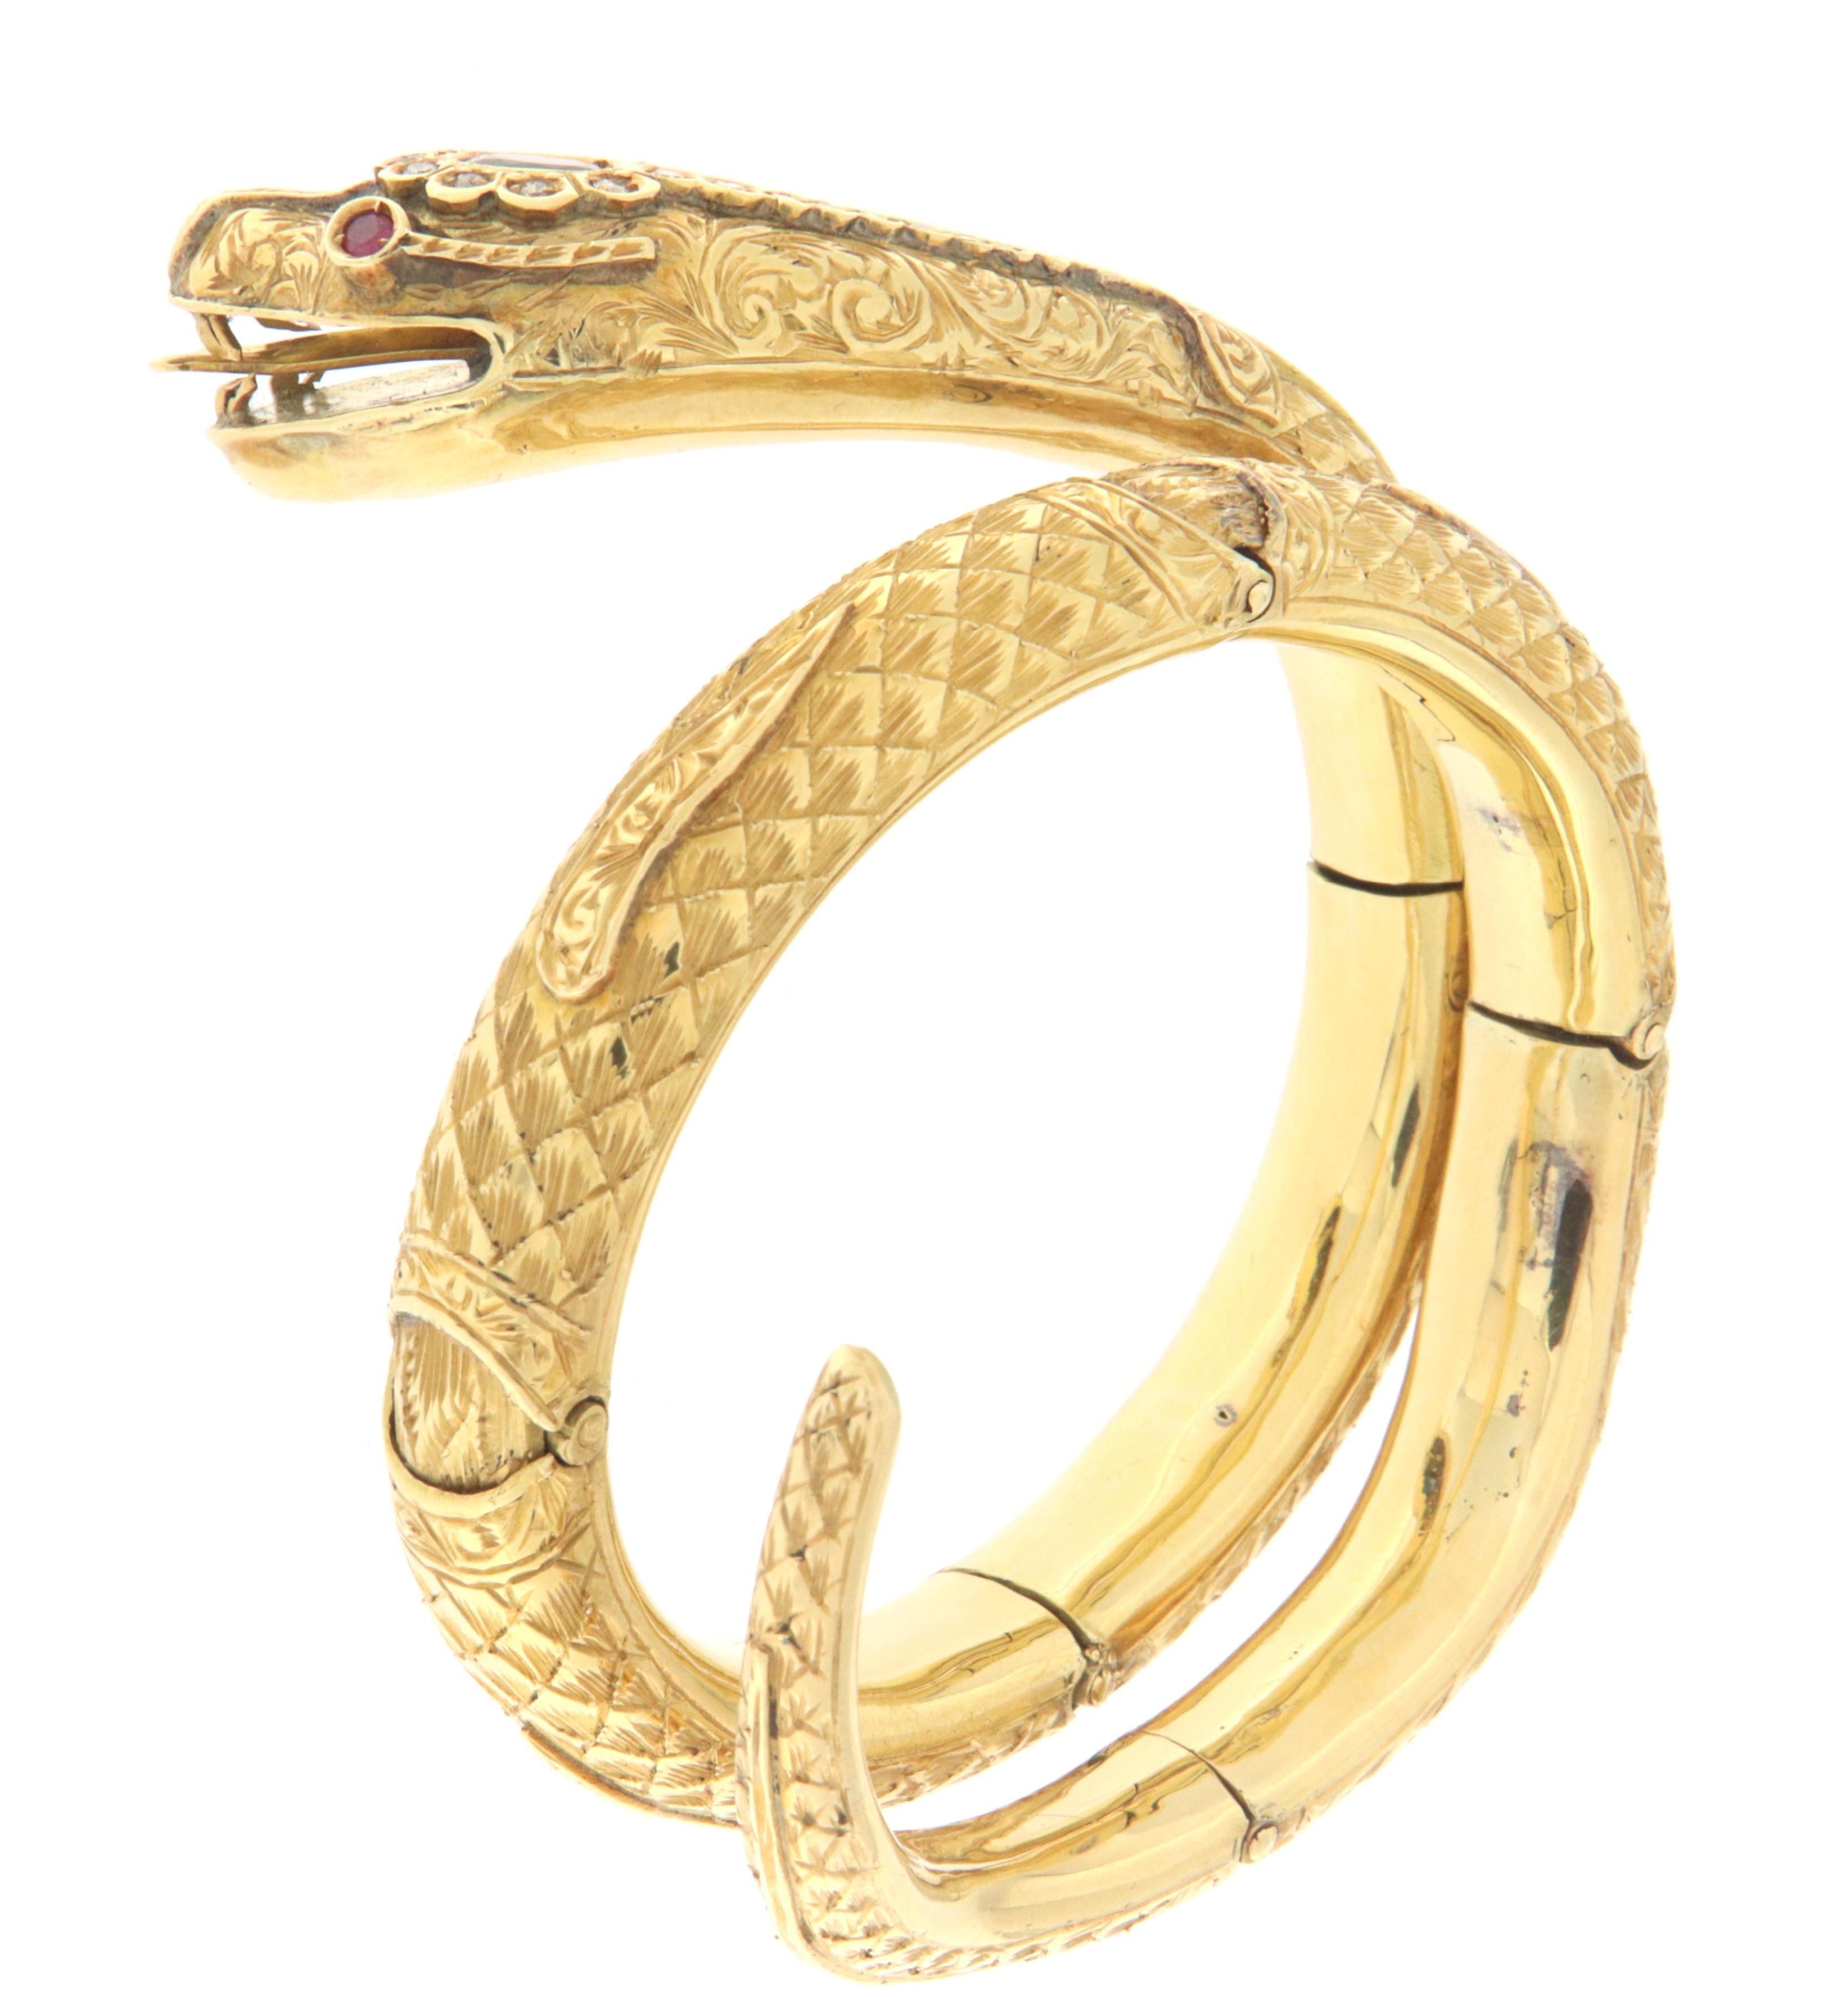 Beautiful 18 karat yellow gold snake bracelet mounted with natural diamonds,sapphire on the head and rubies in the eyes note that the bracelet can be adapted to any wrist size as shown in the video.
Snake-shaped jewels always have a particular charm